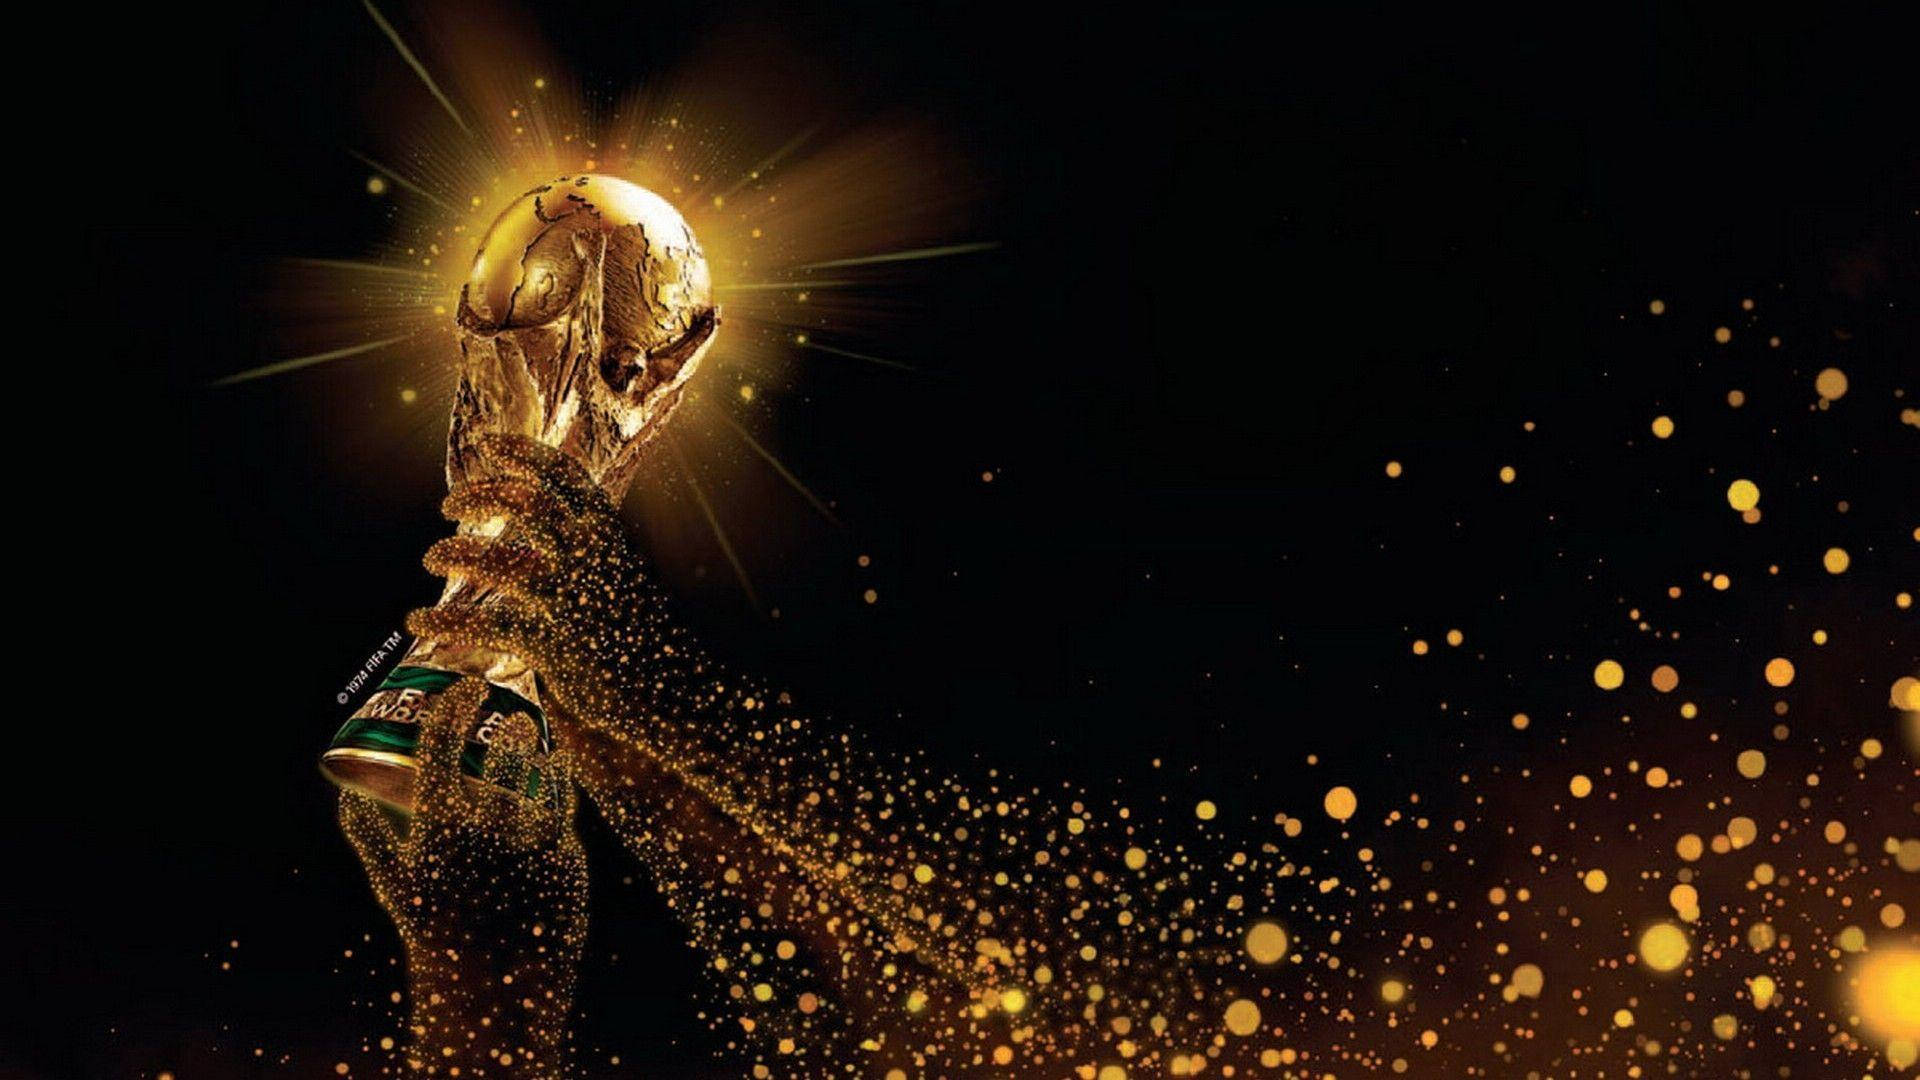 The Trophy Sparkle Ahead of the 2022 FIFA World Cup Wallpaper